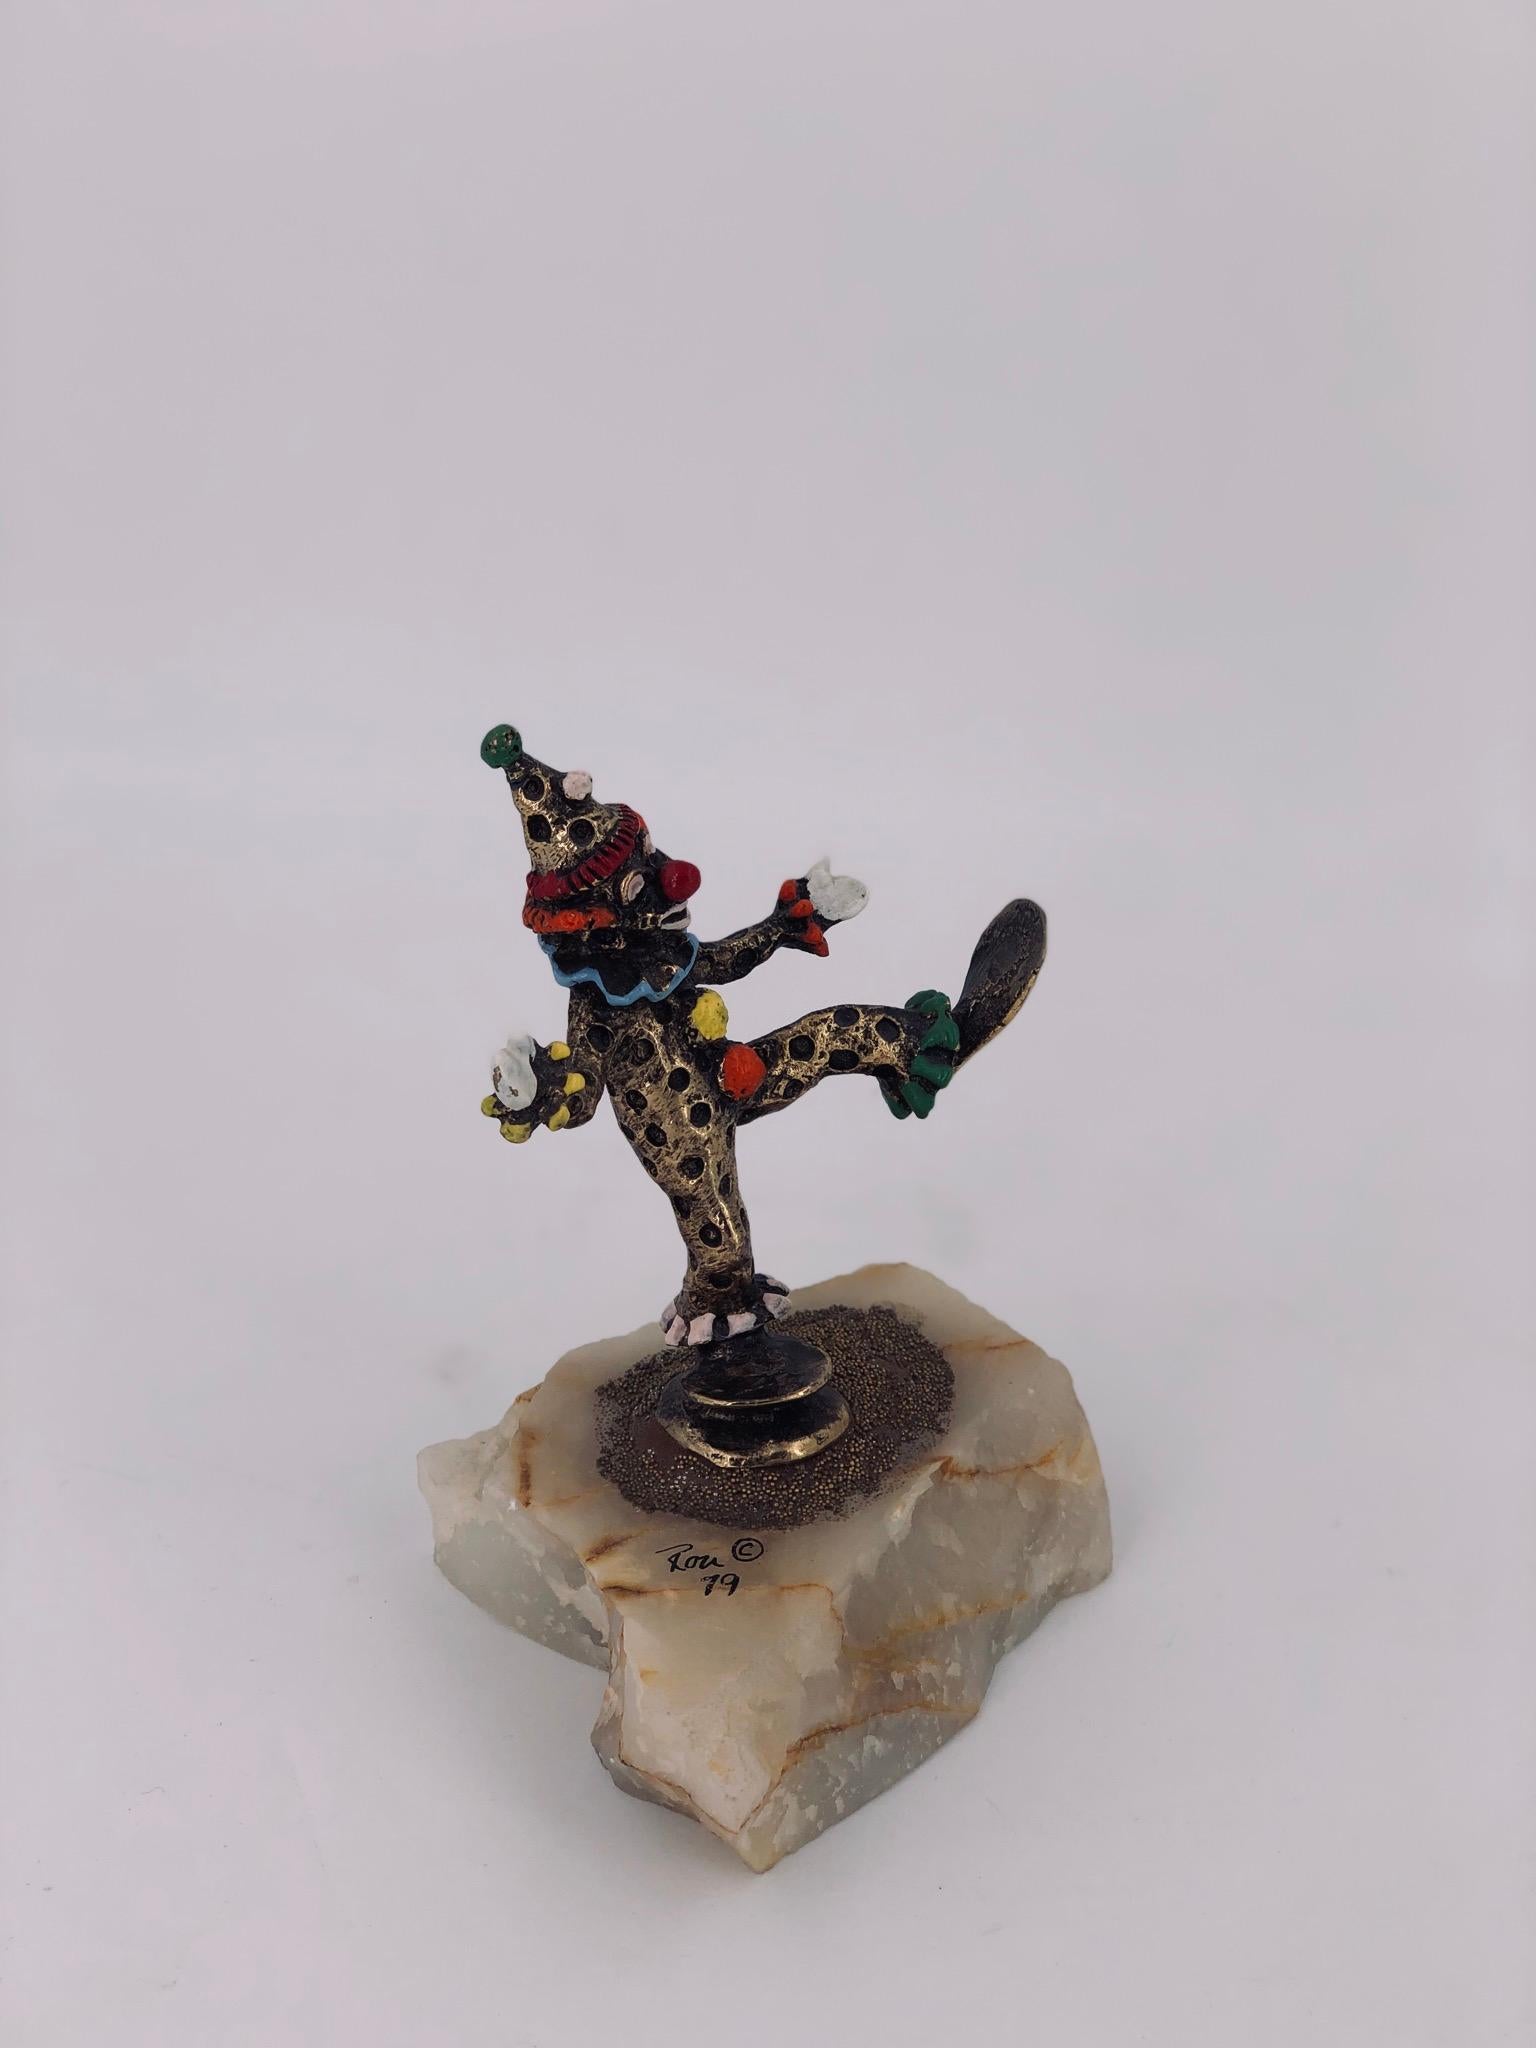 A small sculpture by artist Ron Lee, circa 1970s in bronze with enamel highlights sitting in raw marble base.